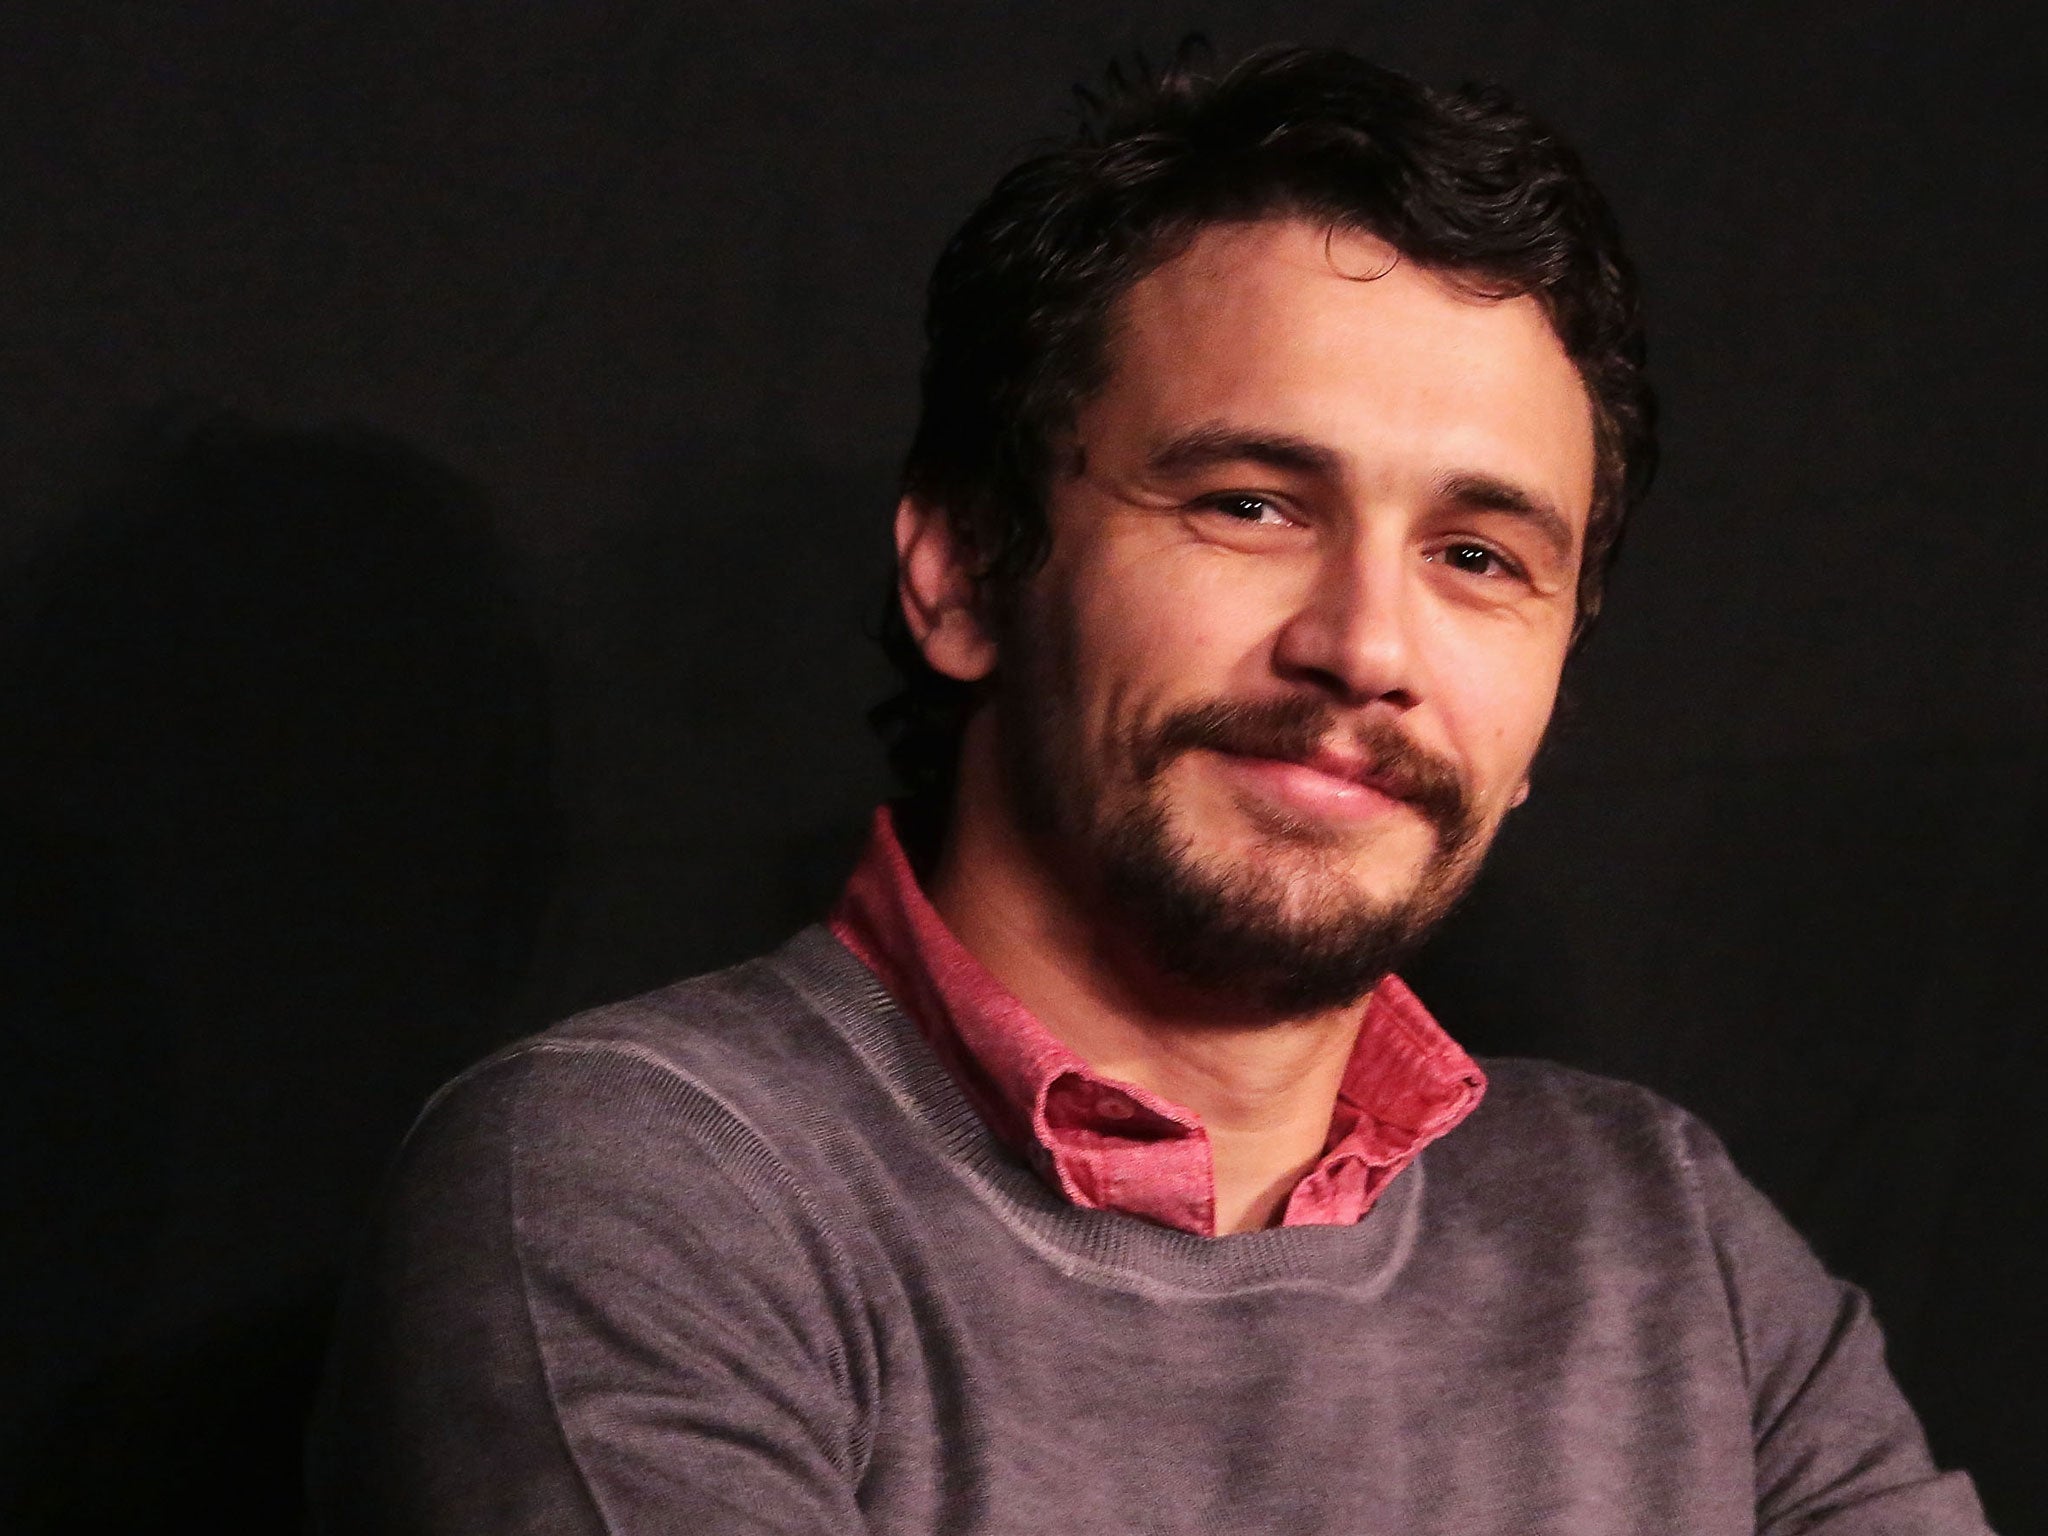 James Franco joked about the messages on Twitter